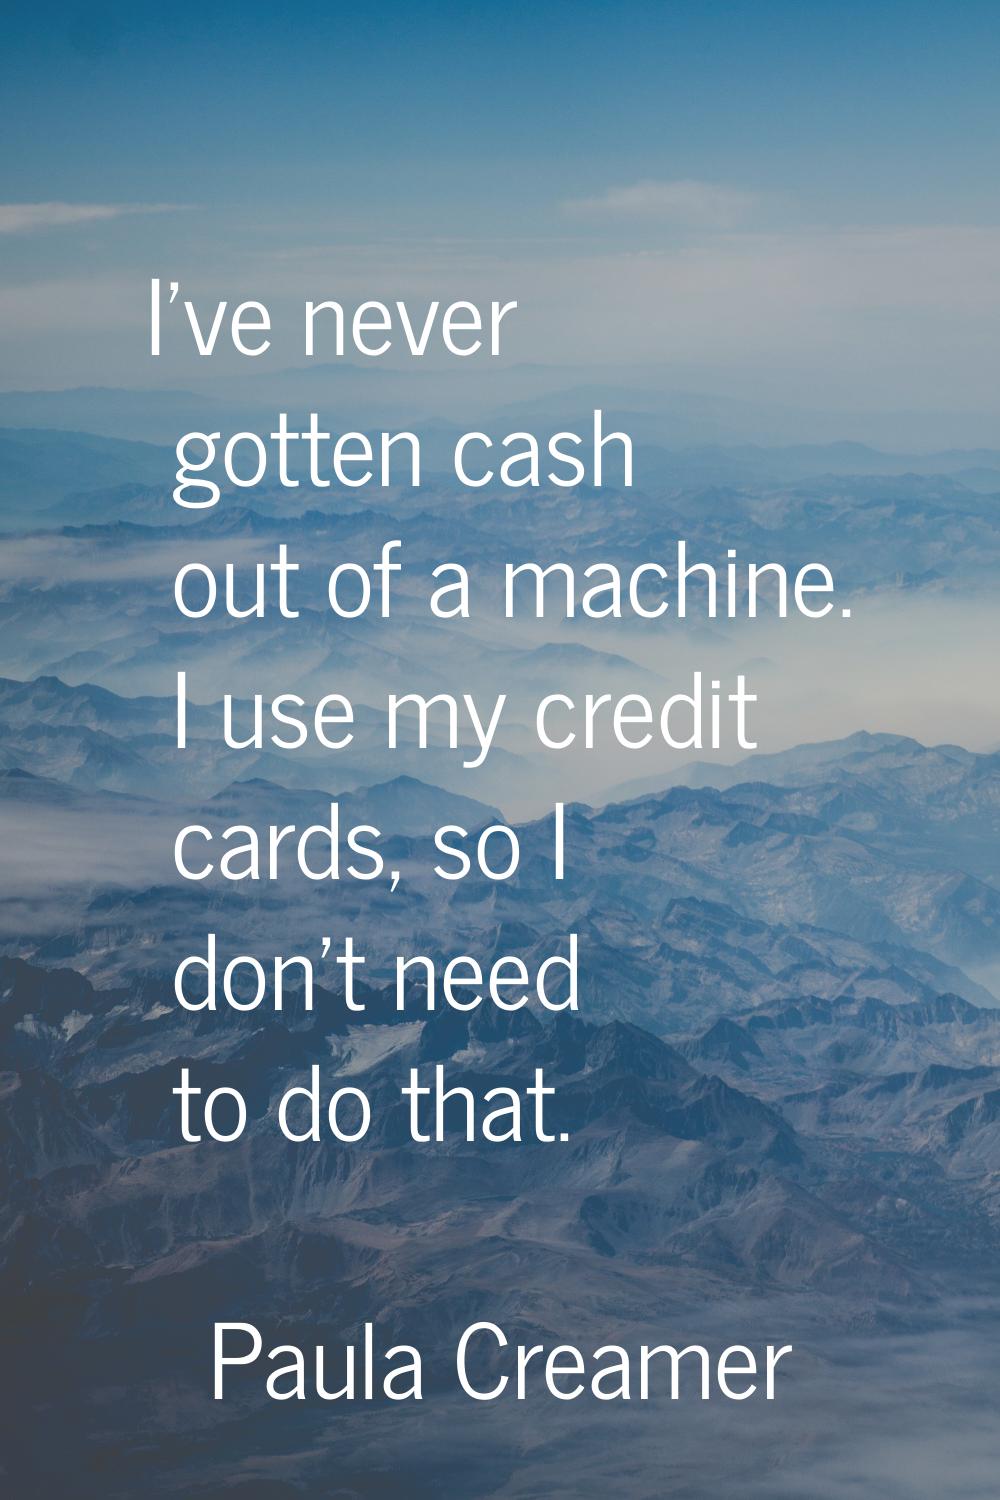 I've never gotten cash out of a machine. I use my credit cards, so I don't need to do that.